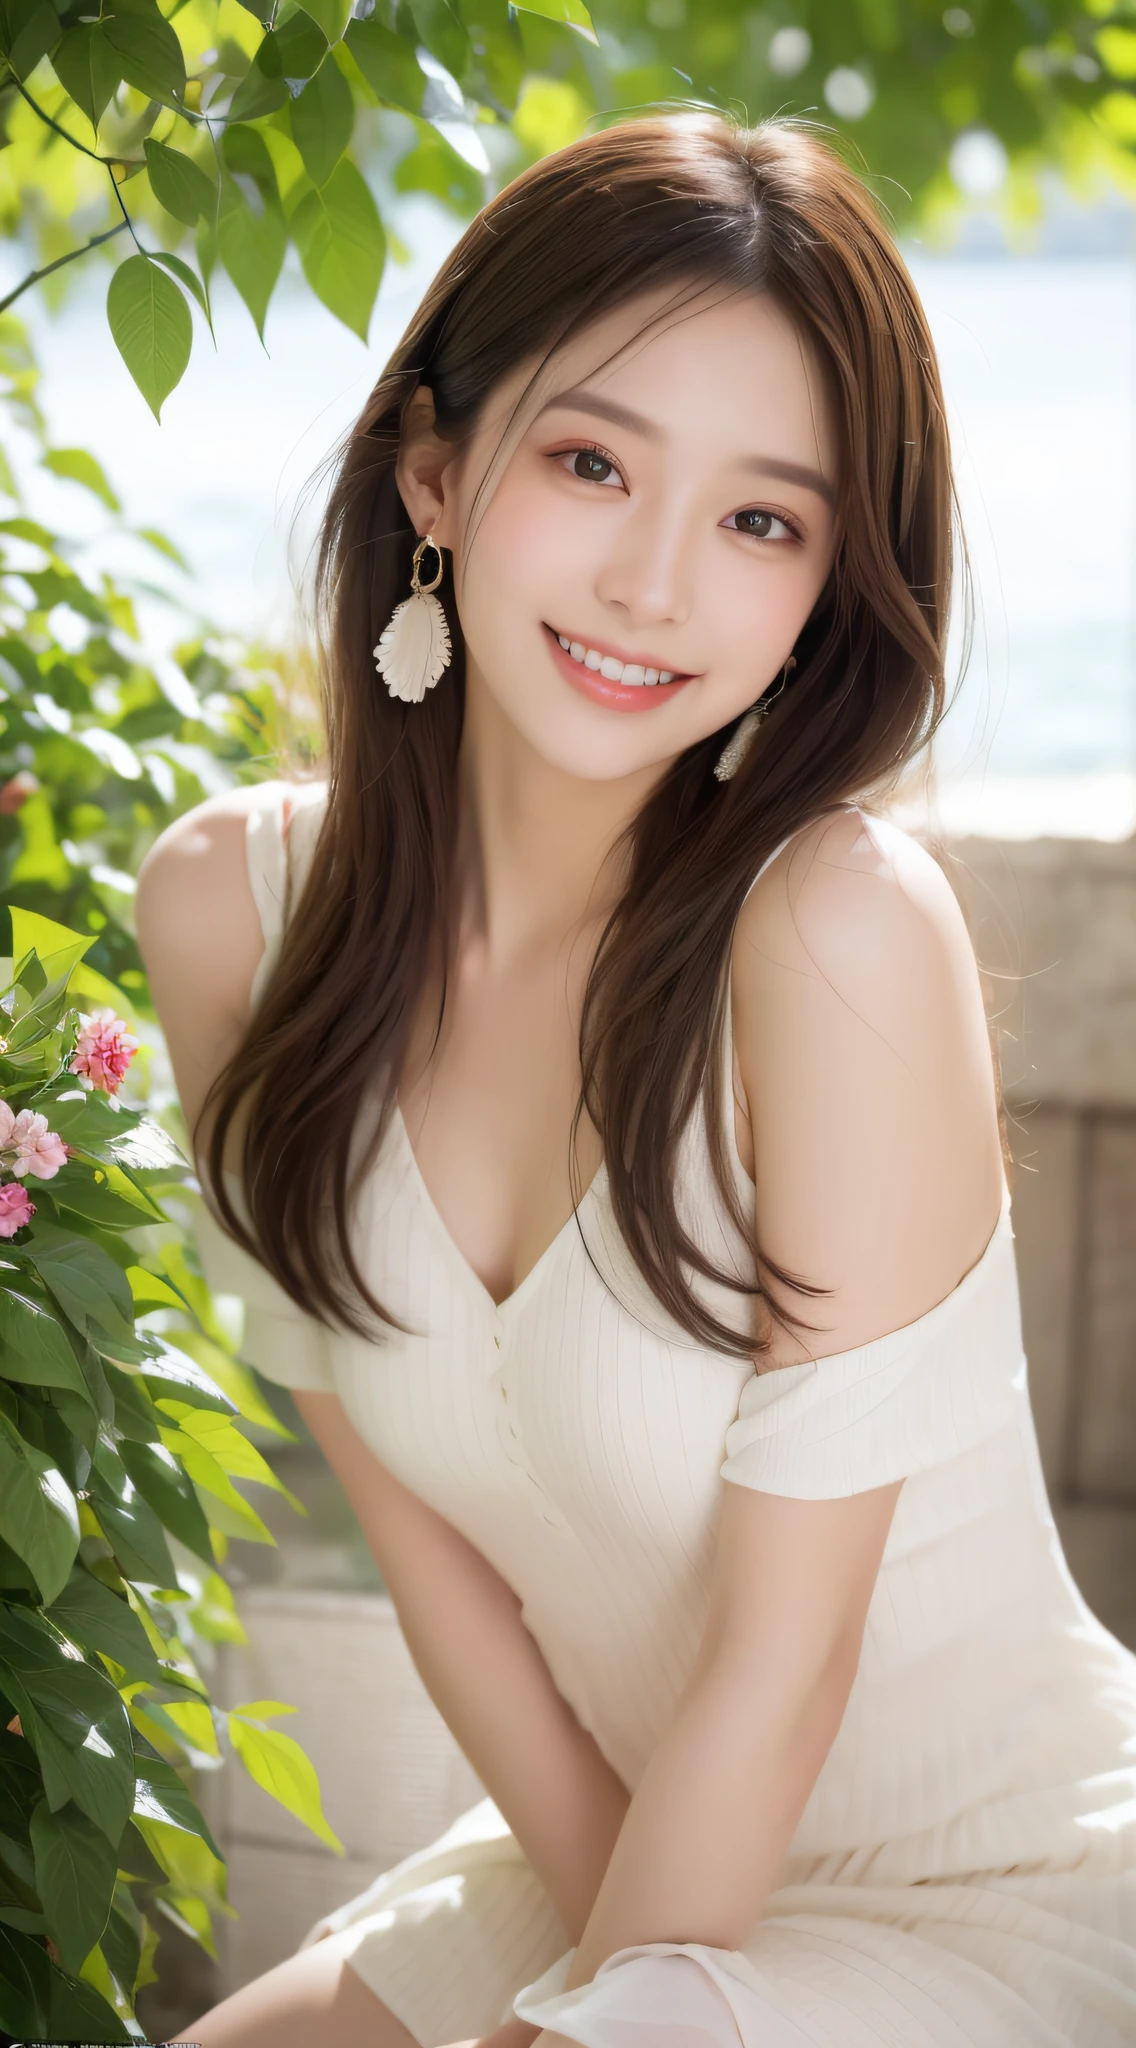 1 girl, hairpins, earrings, jewelry, brown hair, looking at the audience, lips, playful, sitting in front of the drawing board, painting, thighs, whole body, in a sea of flowers or on the beach, she is wearing a white long dress, slightly sideways face, hands caressing long hair, gentle eyes, smiling, as if admiring the beauty of nature, such a photo will definitely make people feel her beautiful and innocent atmosphere. The tone of the photo can be predominantly natural, biased towards bright and soft, making people feel warm and serene. It seems to be dancing in harmony with its surroundings. Her breath is full of vitality and vitality, as if her whole body is venting the energy of youth. The whole picture is made more vivid by her presence, making people feel endless joy and vitality.